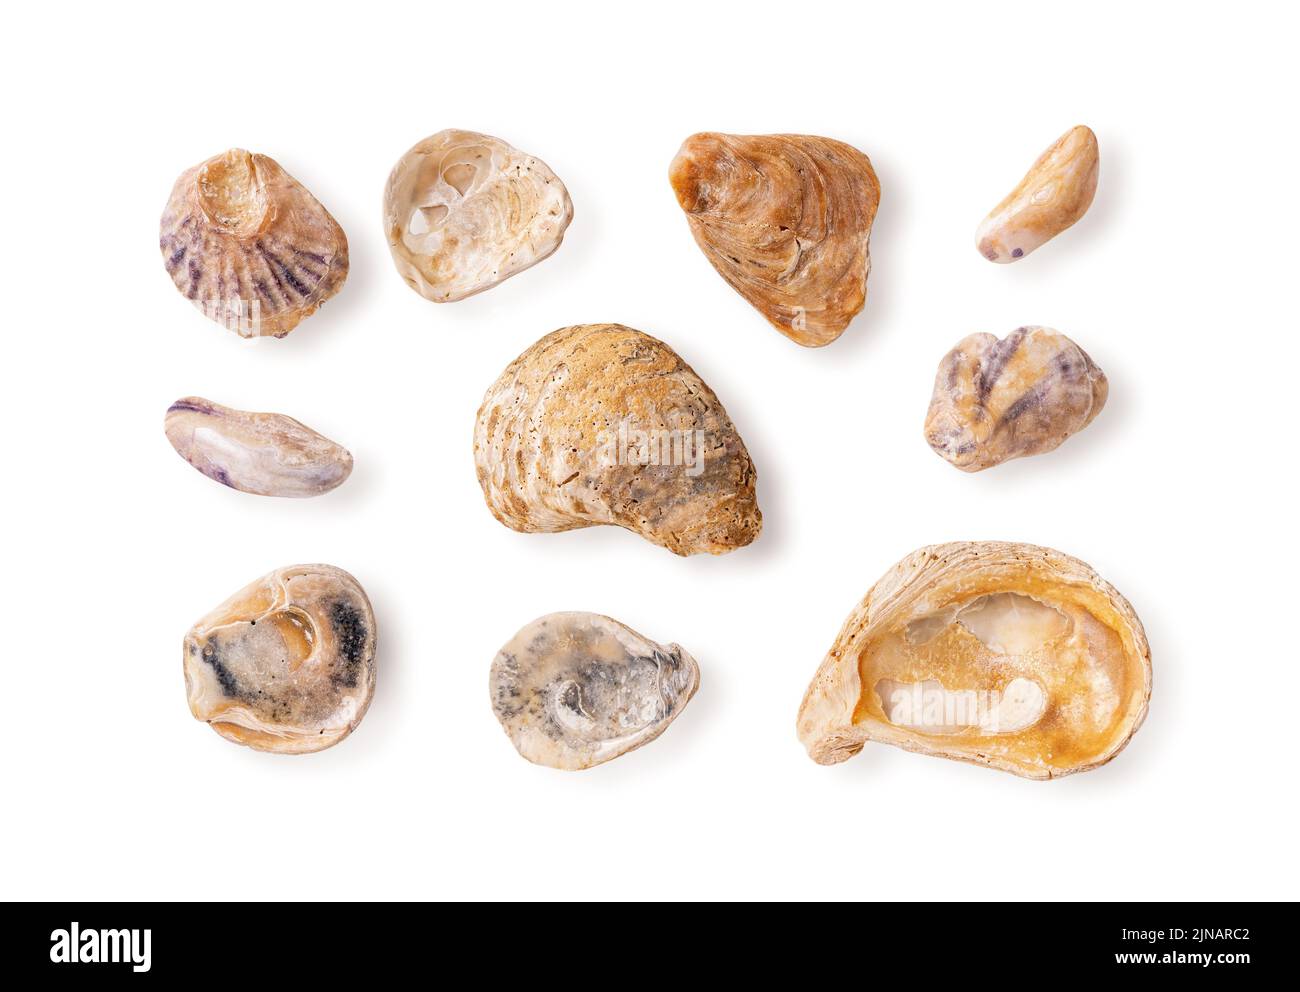 Set of wethered sea shell fragments isolated on a white background. Broken oyster shells made smooth by sea water and sand. Old seashell variety macro Stock Photo